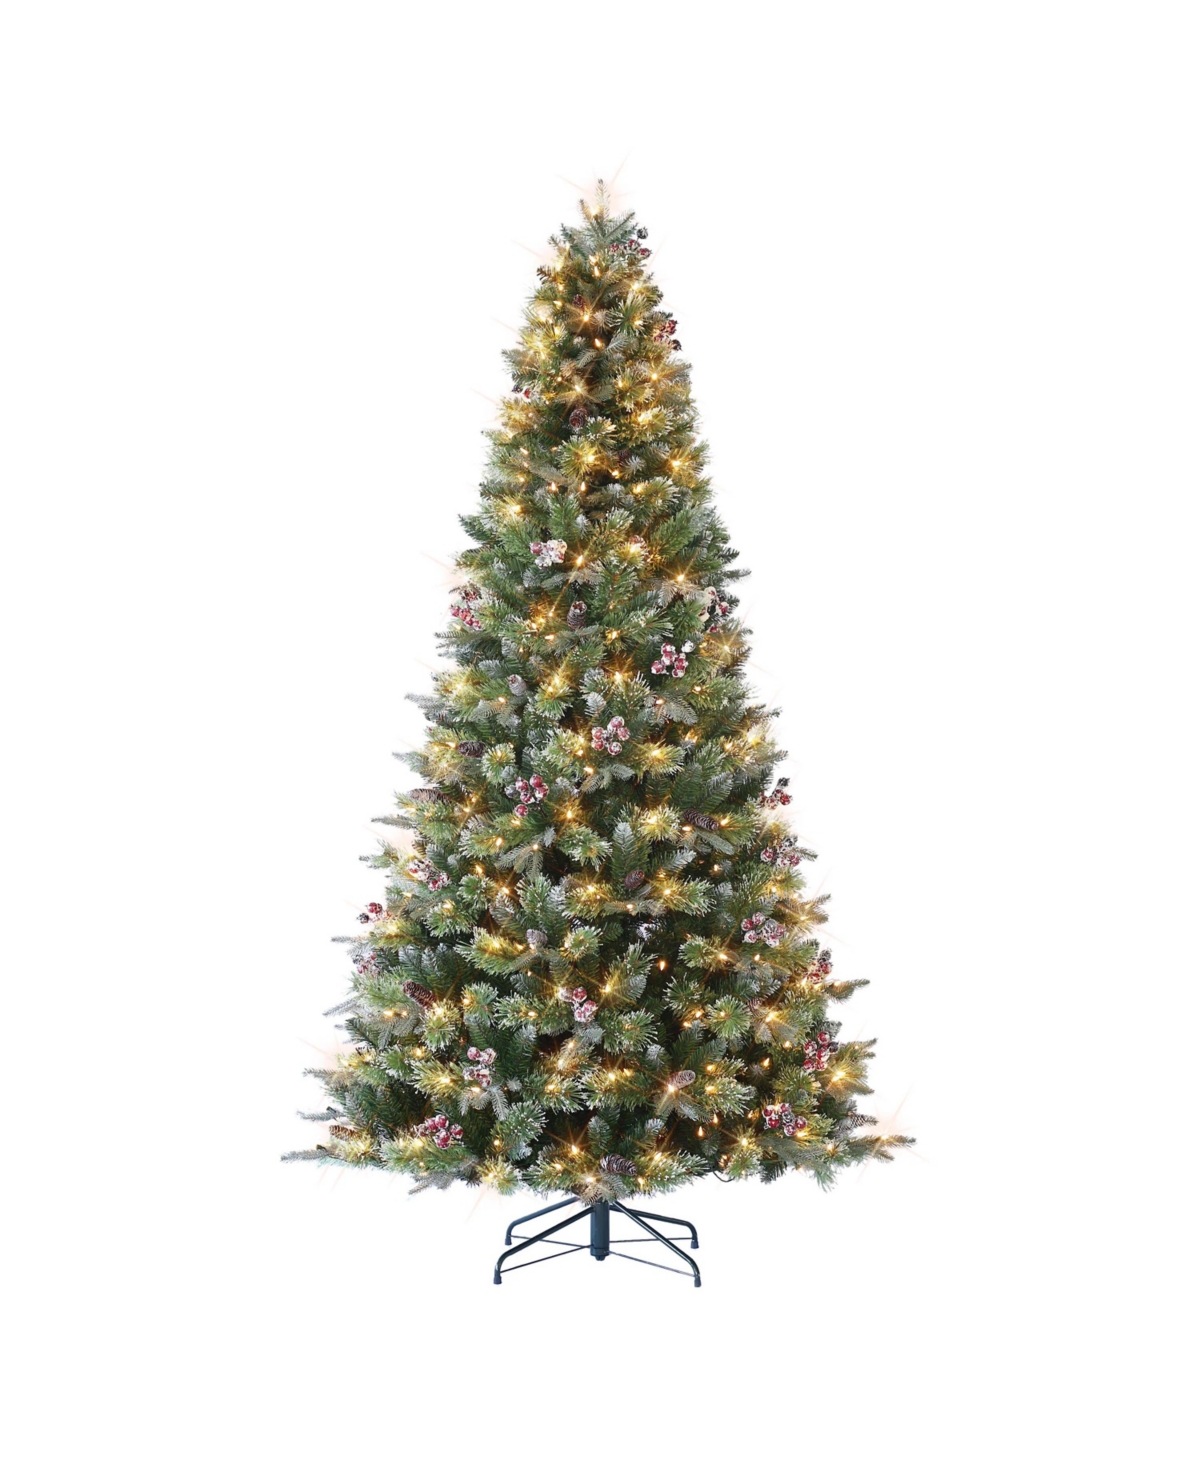 Puleo 7.5' Pre-lit Frosted Berry Spruce Tree With 500 Warm White Led Lights, 1586 Tips In Green